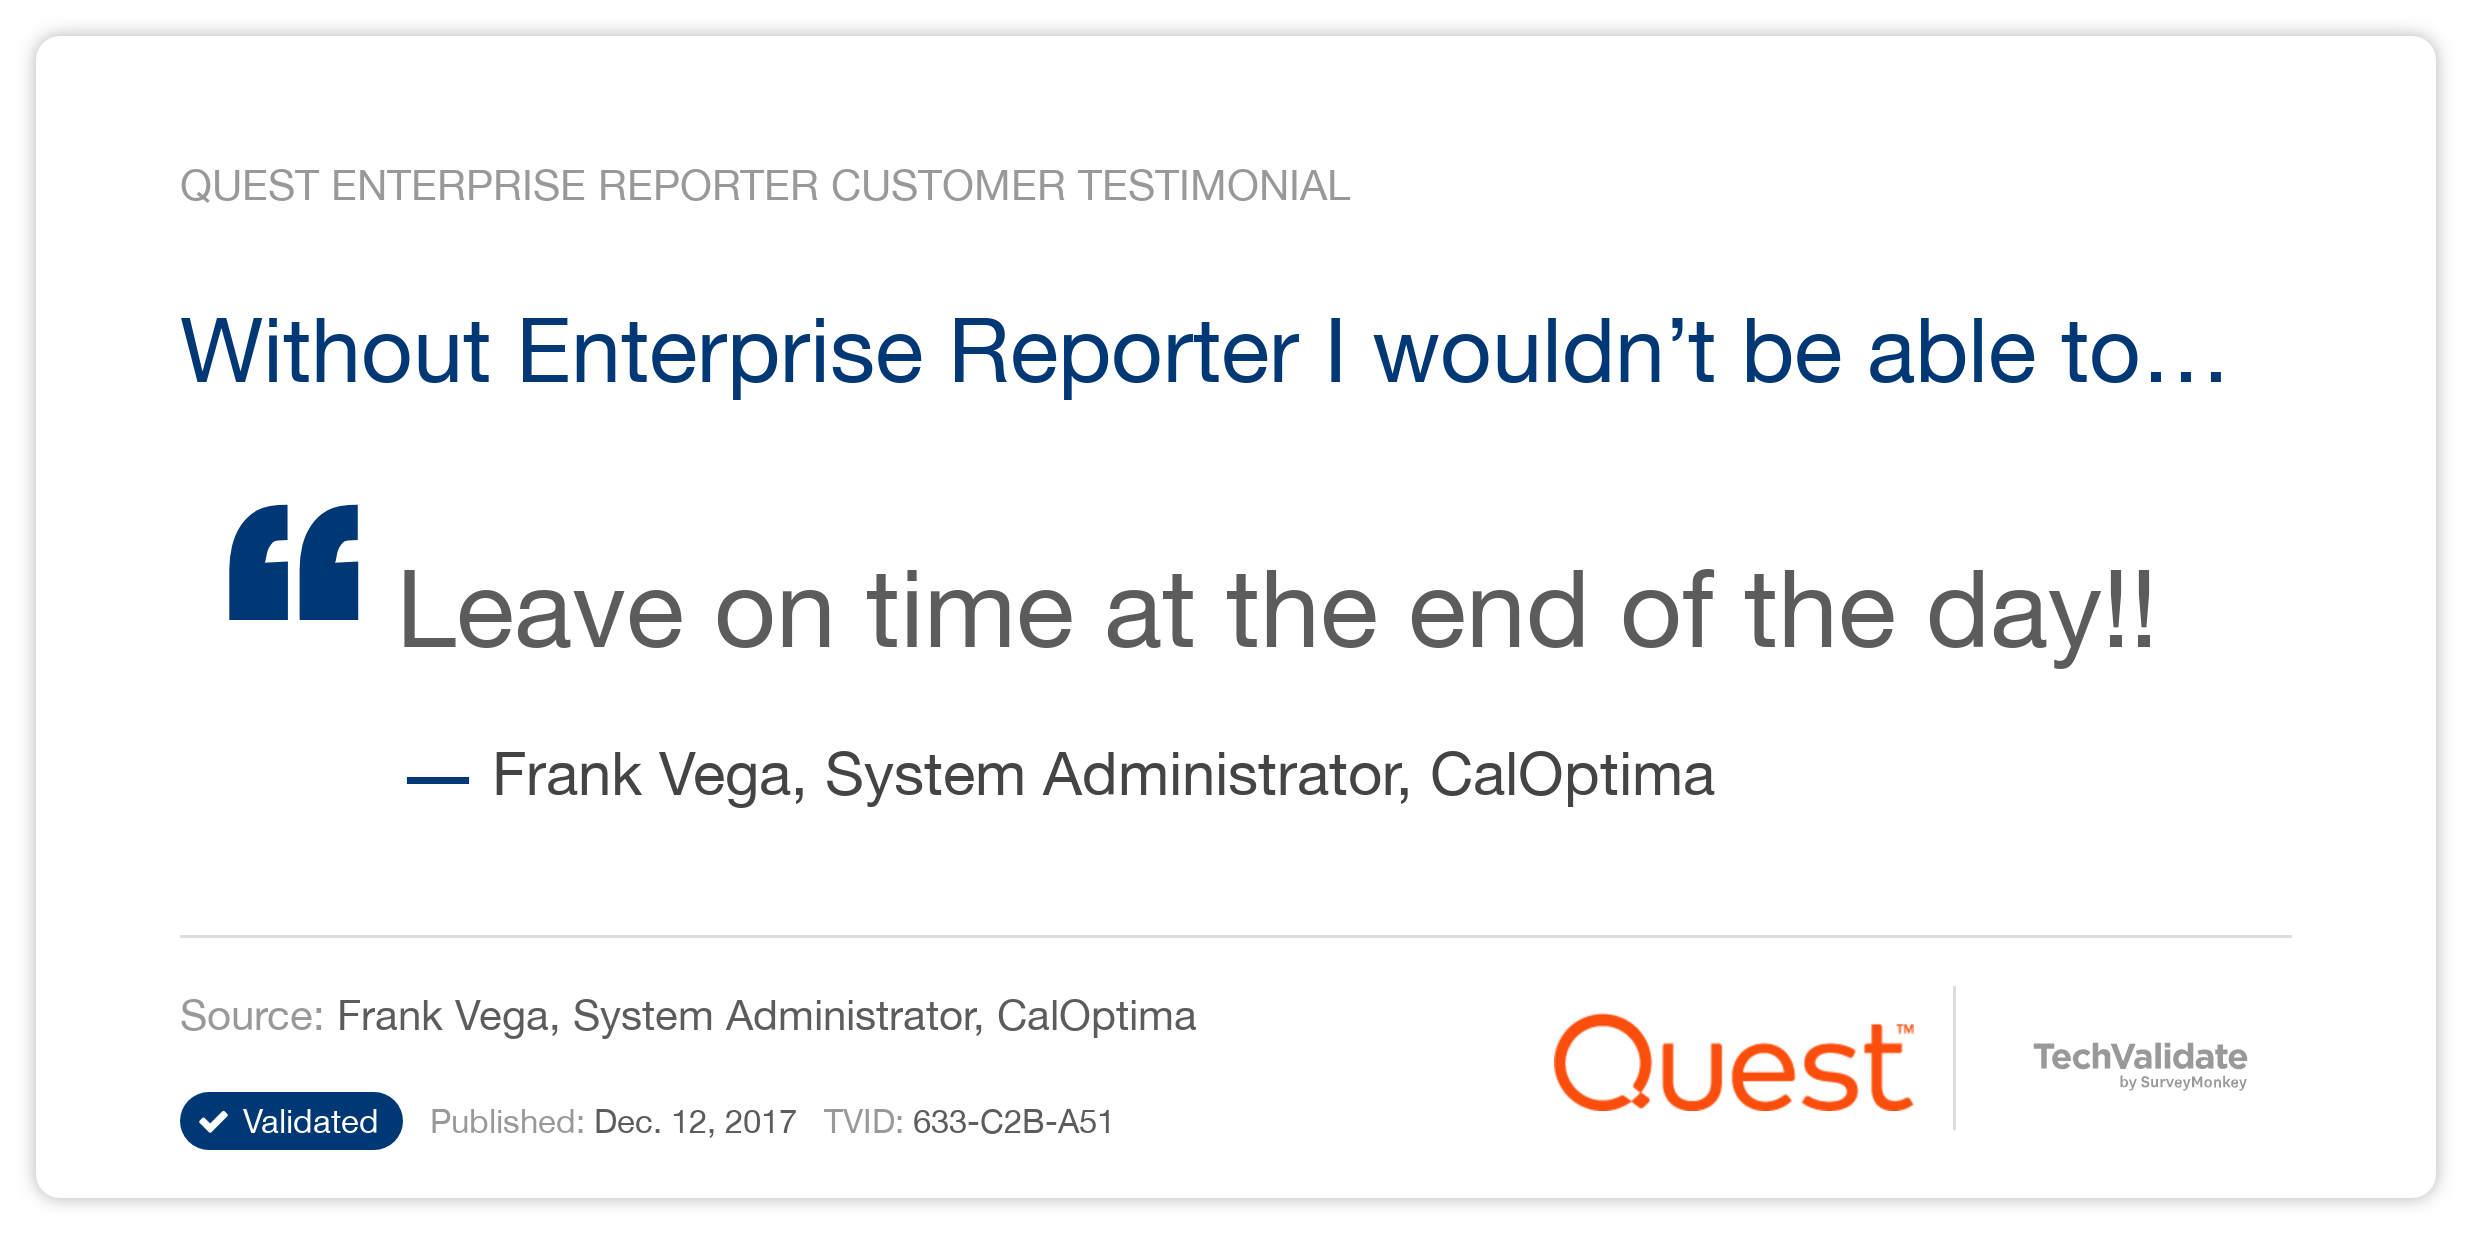 Without Enterprise Reporter I wouldn’t be able to…